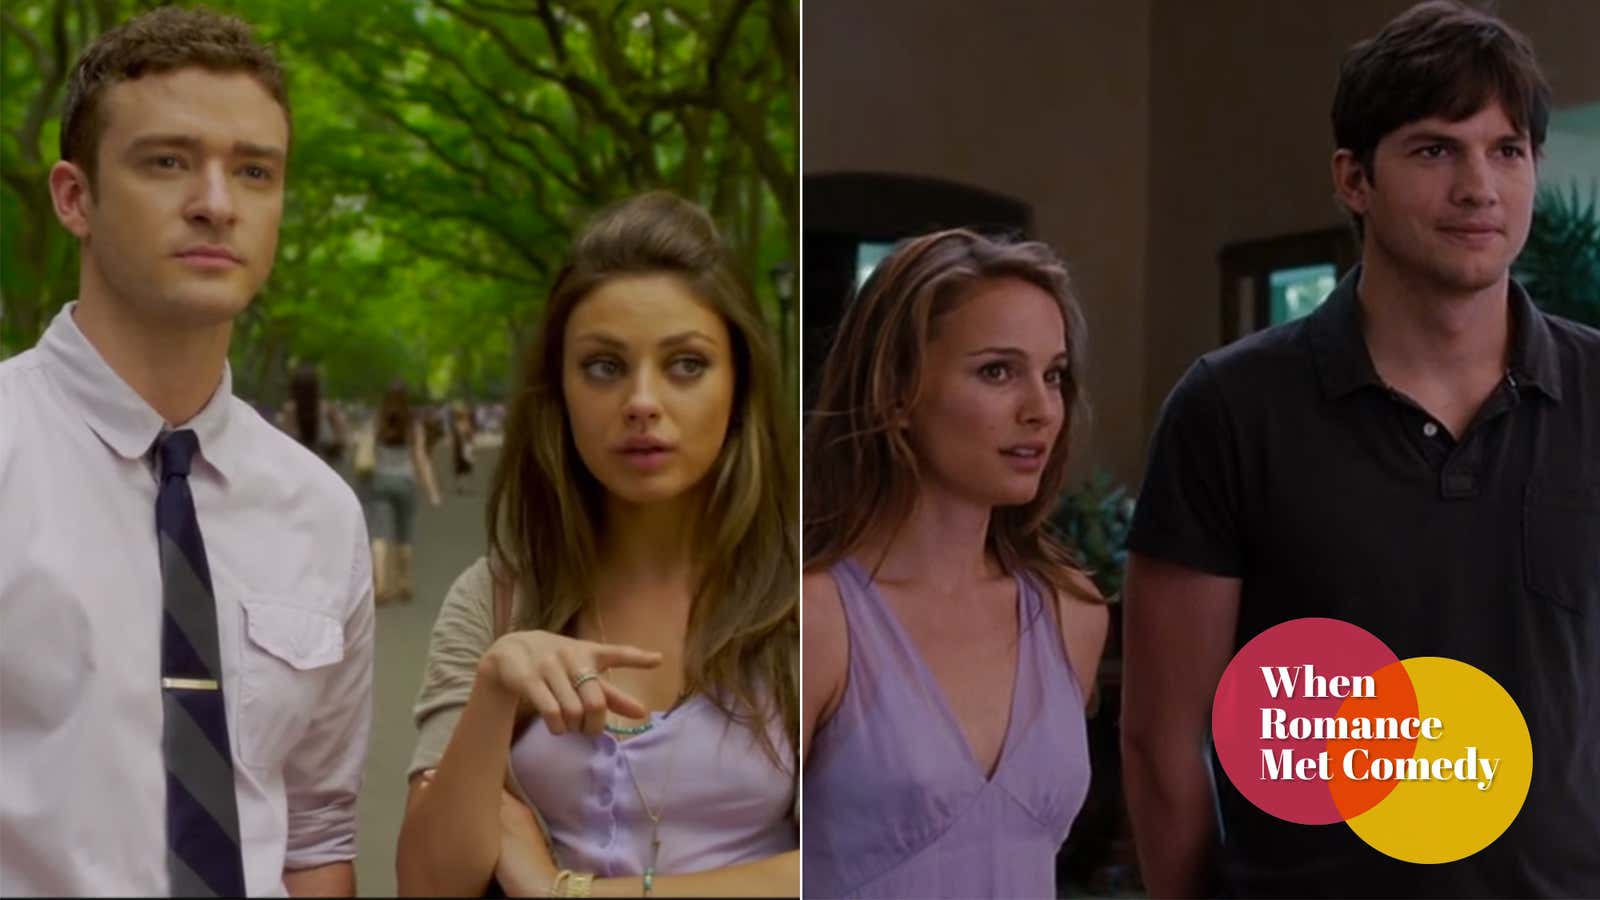 Screenshots: Friends With Benefits and No Strings Attached